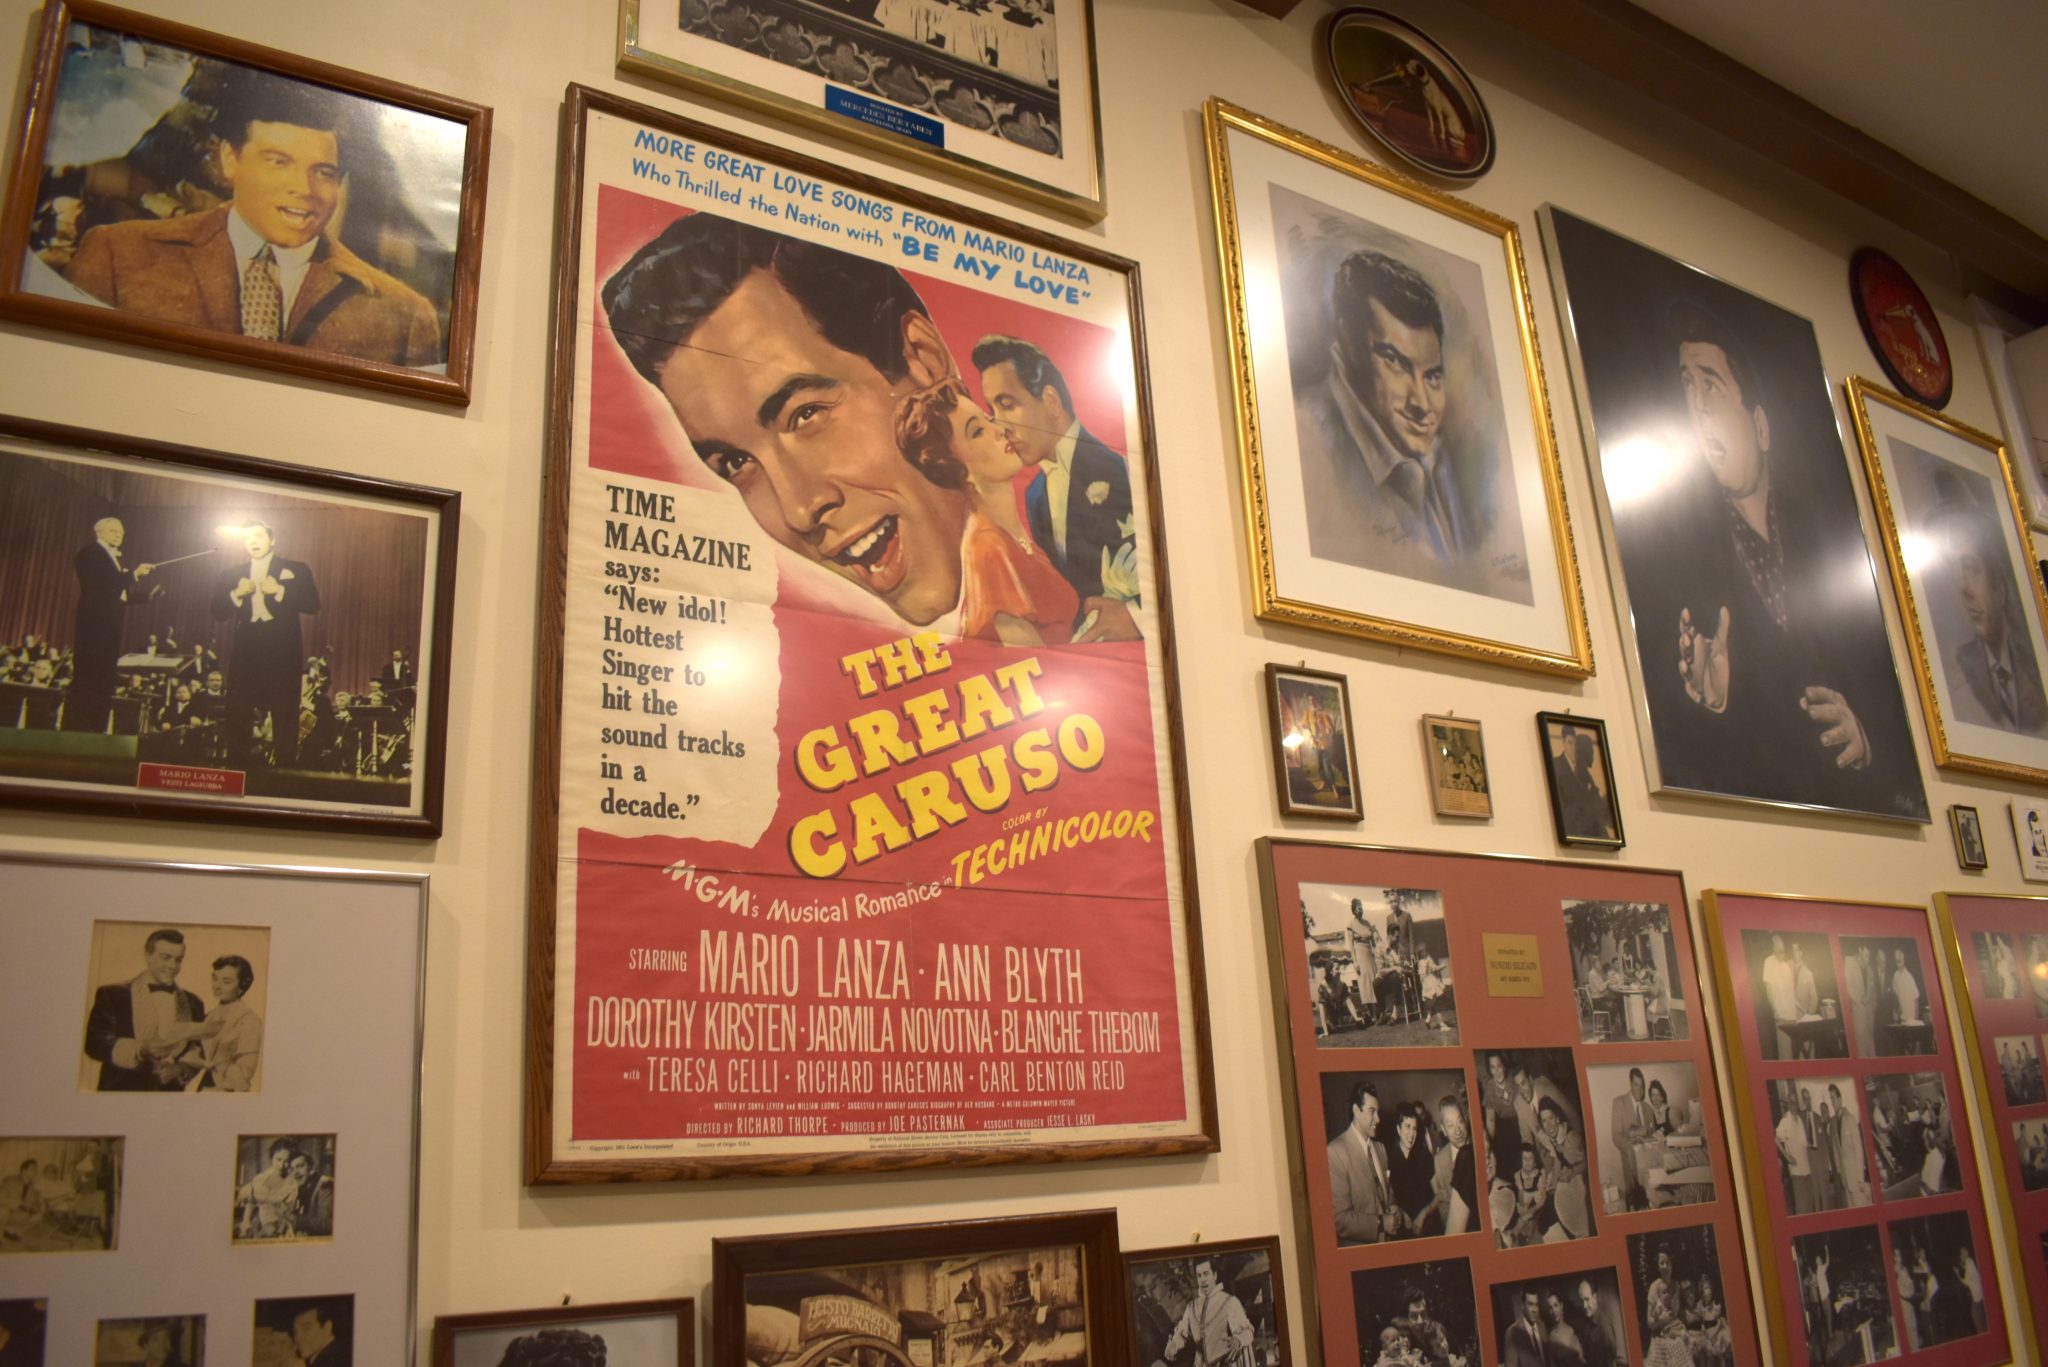 Keeping Mario Lanza’s memory alive and well